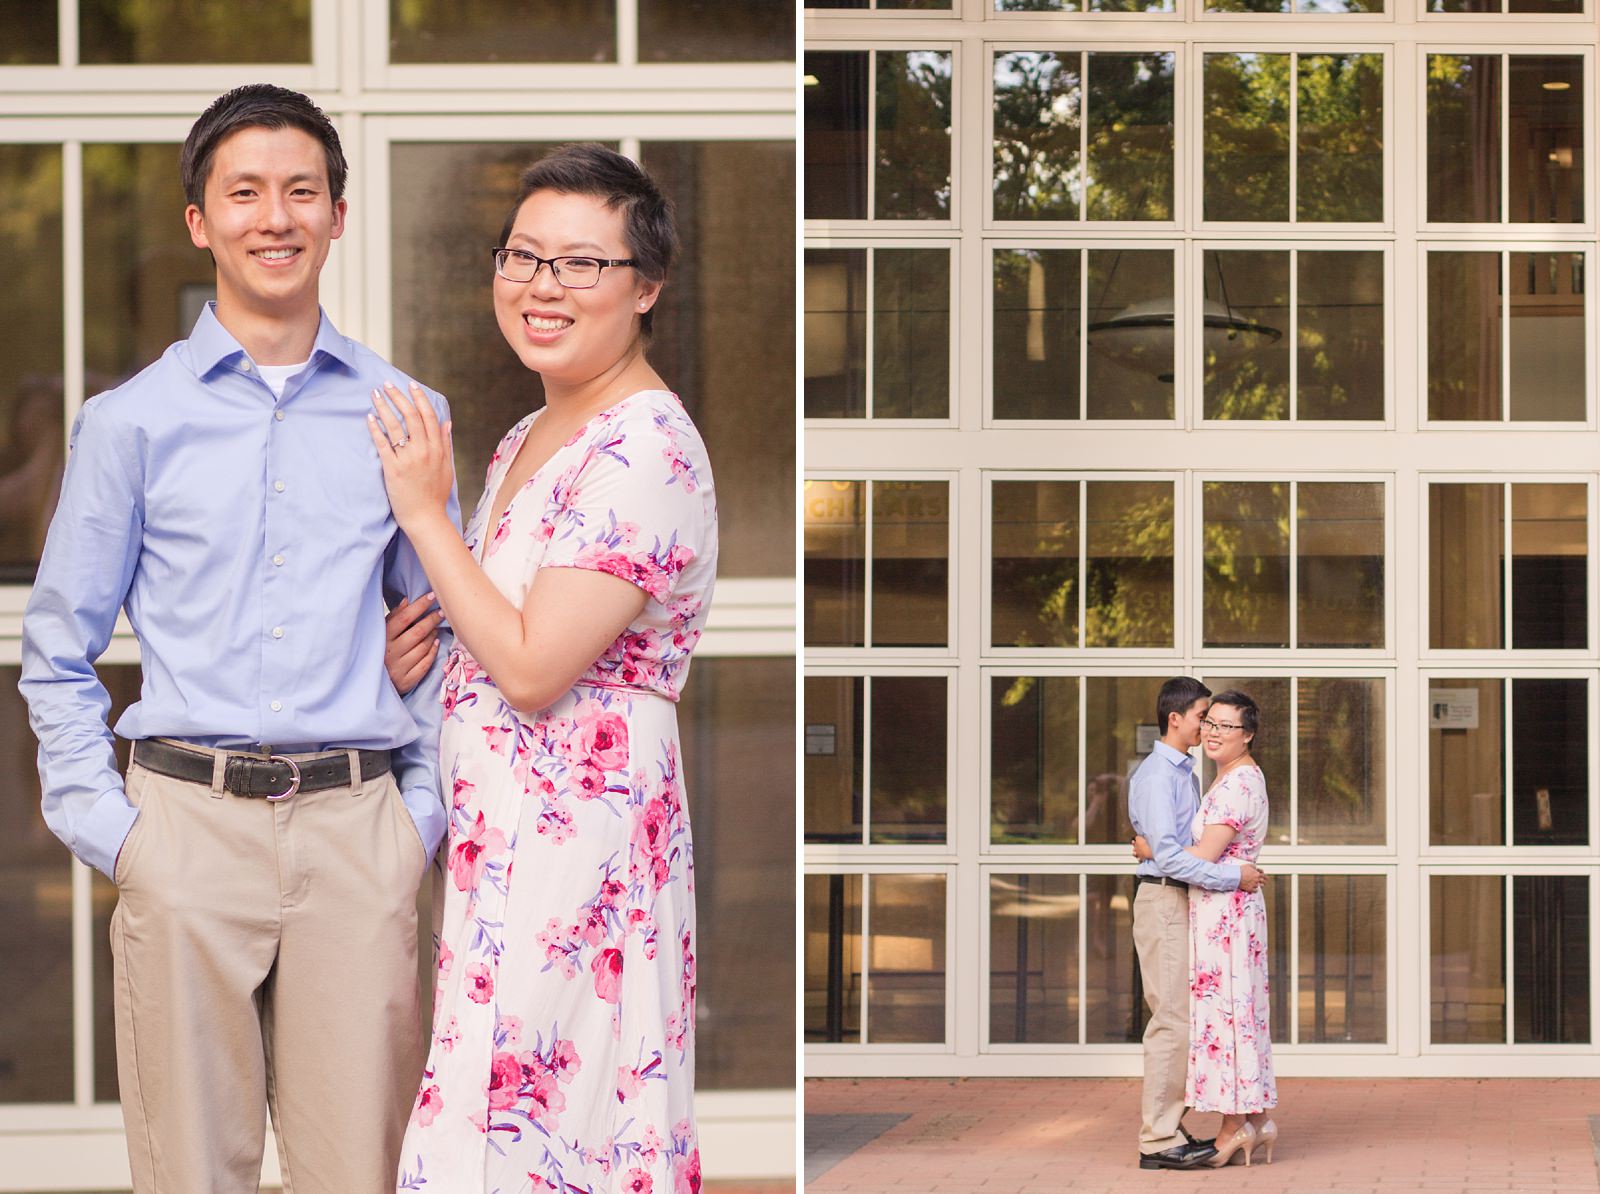 Soon to be Bride and Groom engagement at their Alma Mater by Adrienne and Dani Photography